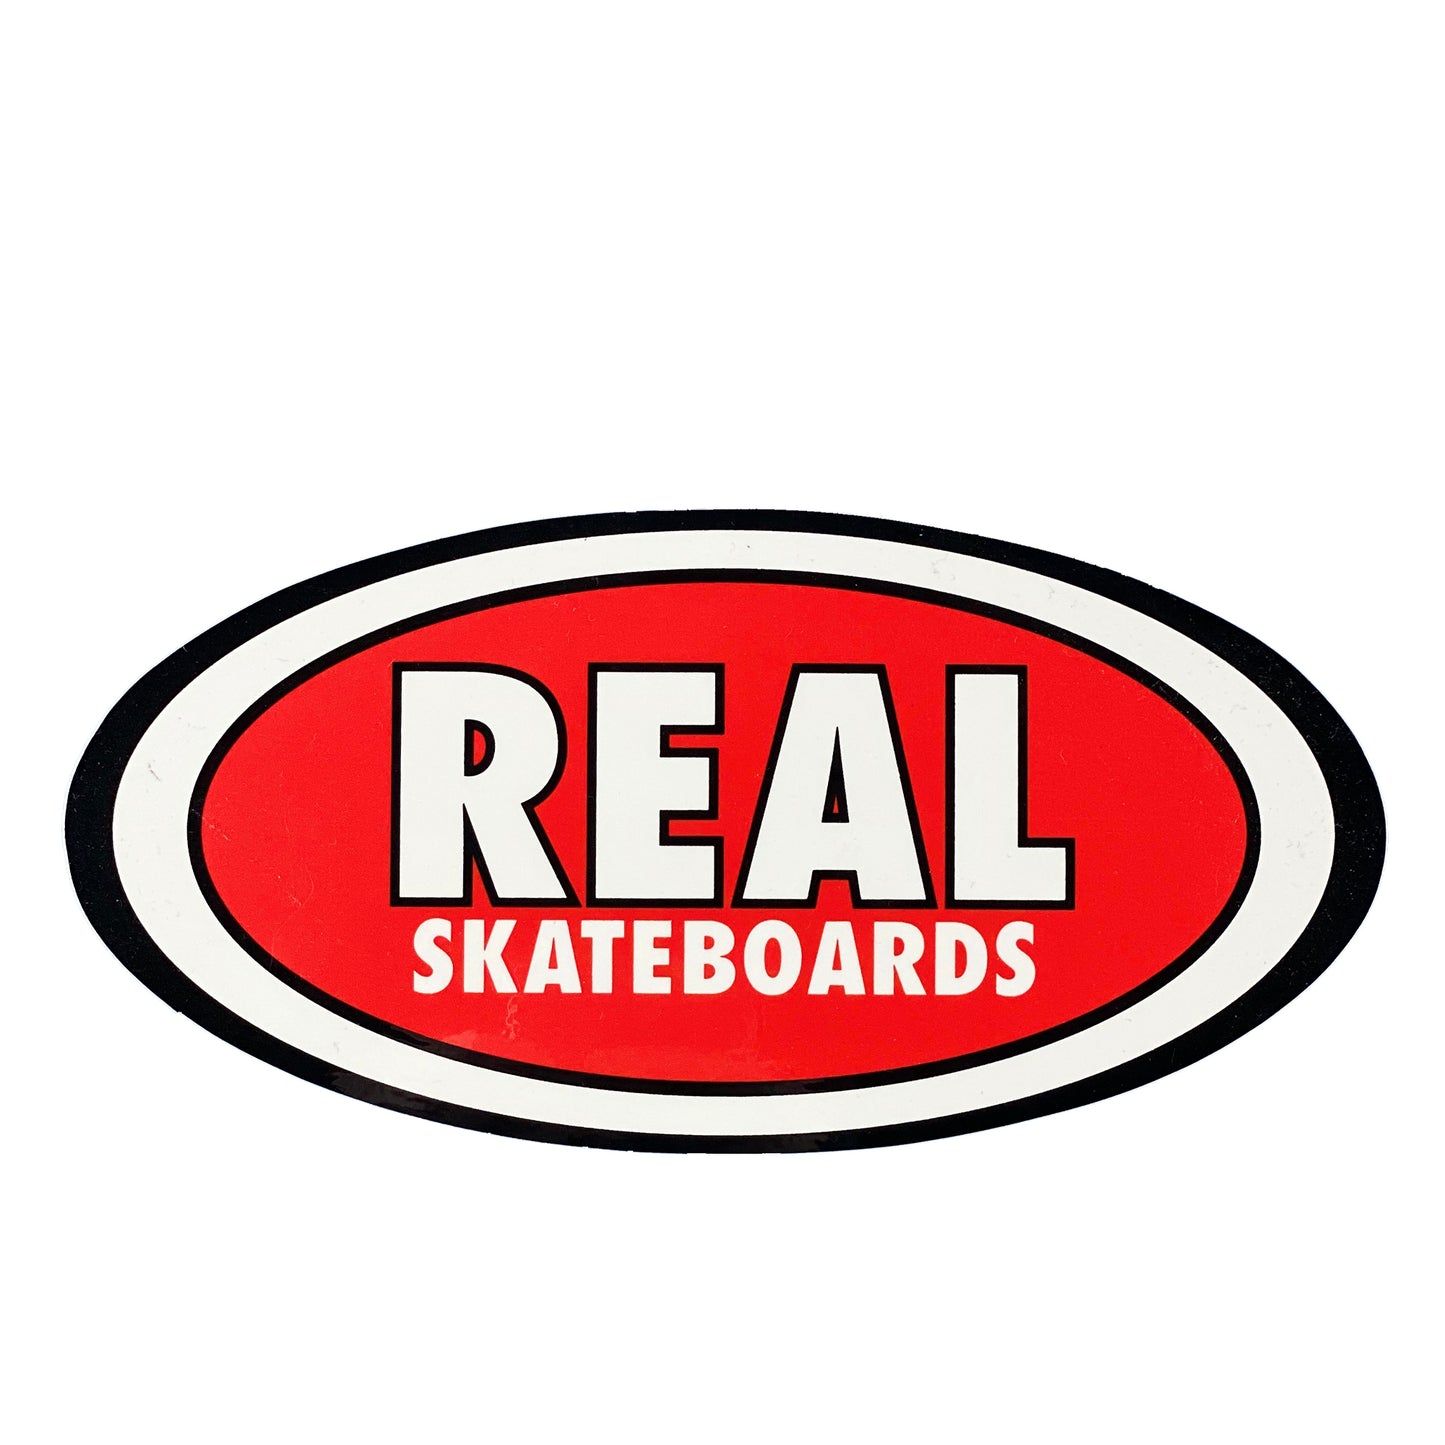 Real Oval Logo Sticker Medium - Red - Prime Delux Store